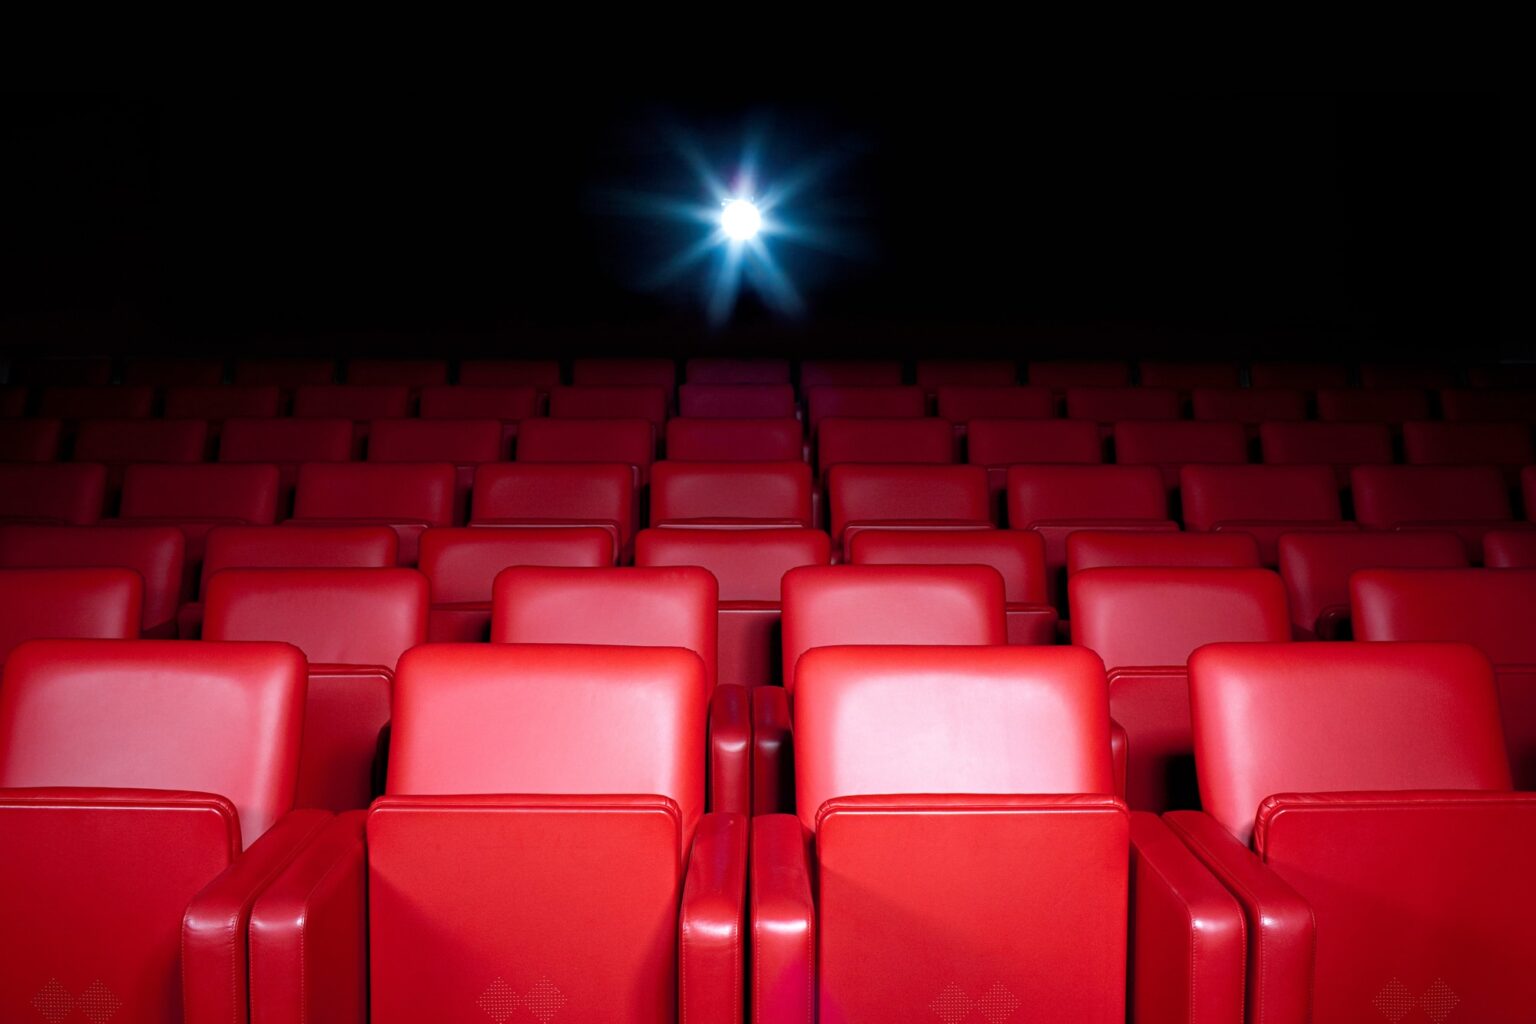 COVID-19 is taking a major toll on one of America's fondest activities. Will closing movie theaters destroy the big screen experience?